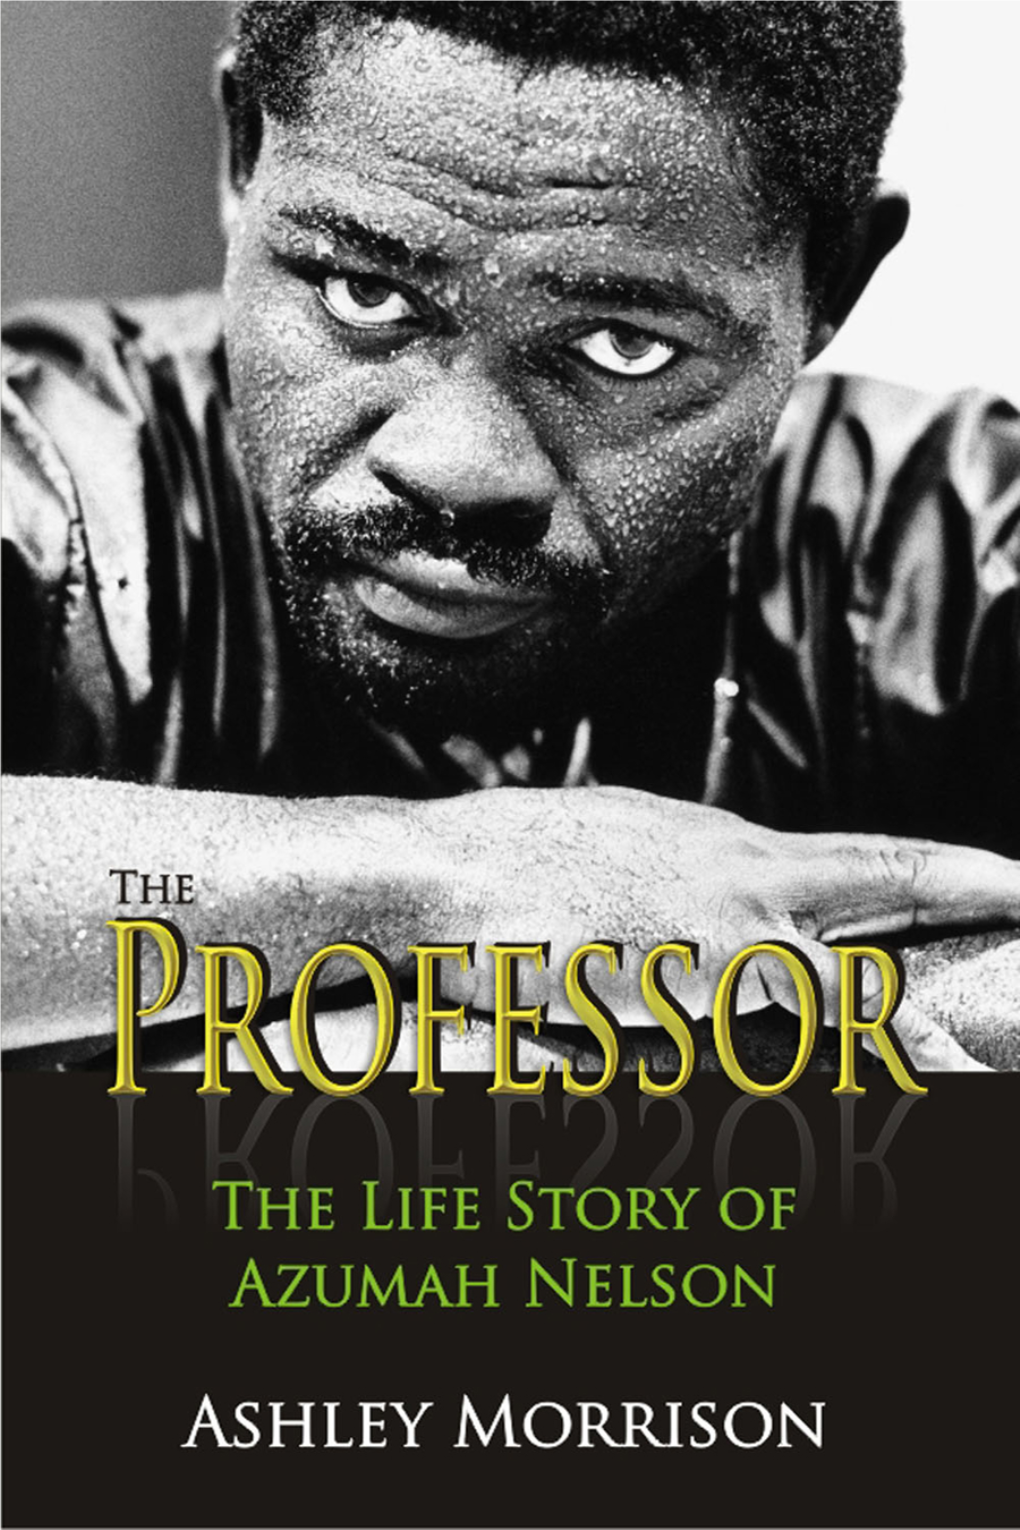 The Life Story of Azumah Nelson